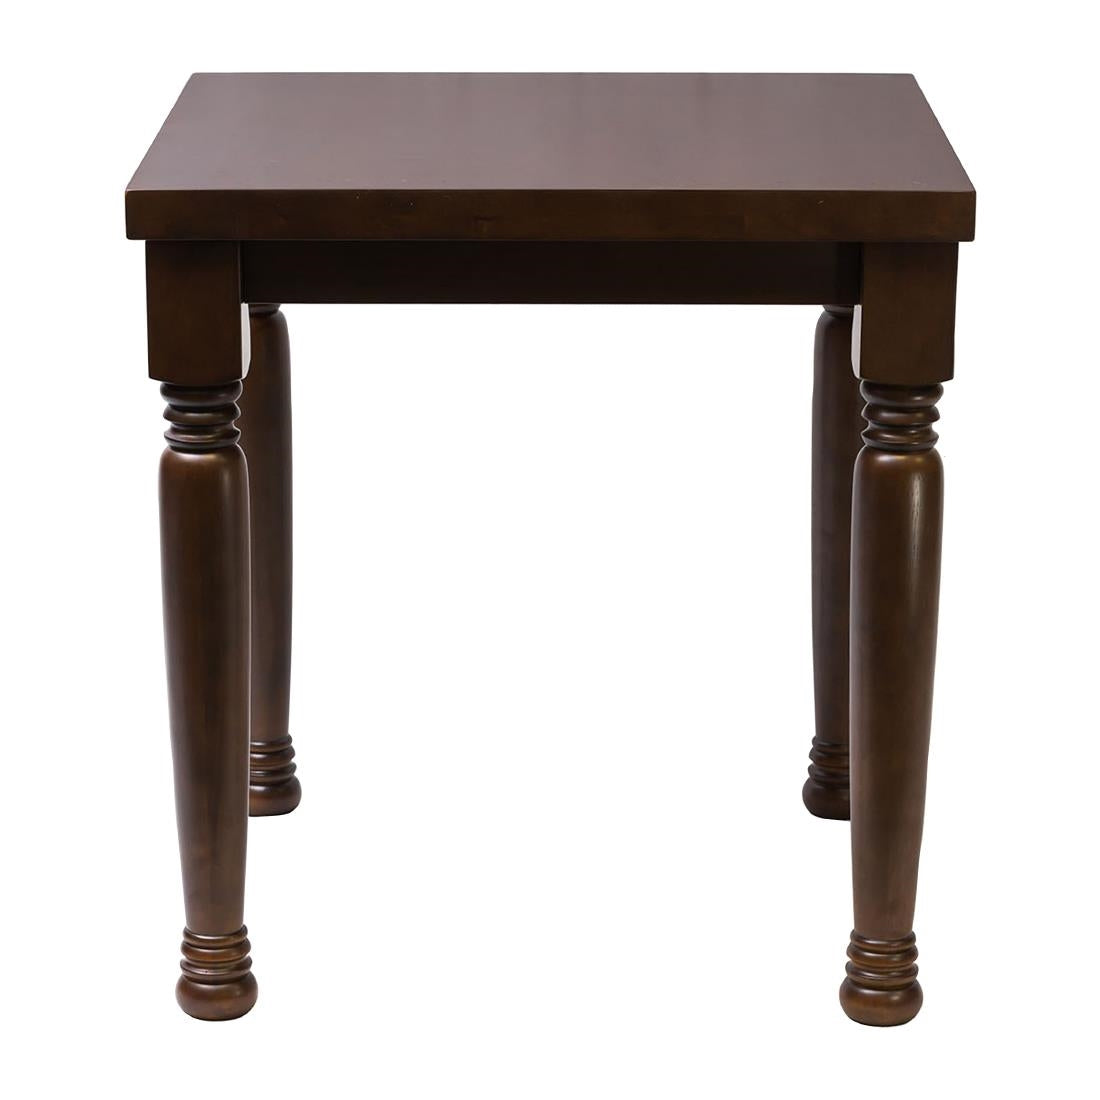 FT491 Cotswold Dark Wood Square Dining Table 700x700mm JD Catering Equipment Solutions Ltd